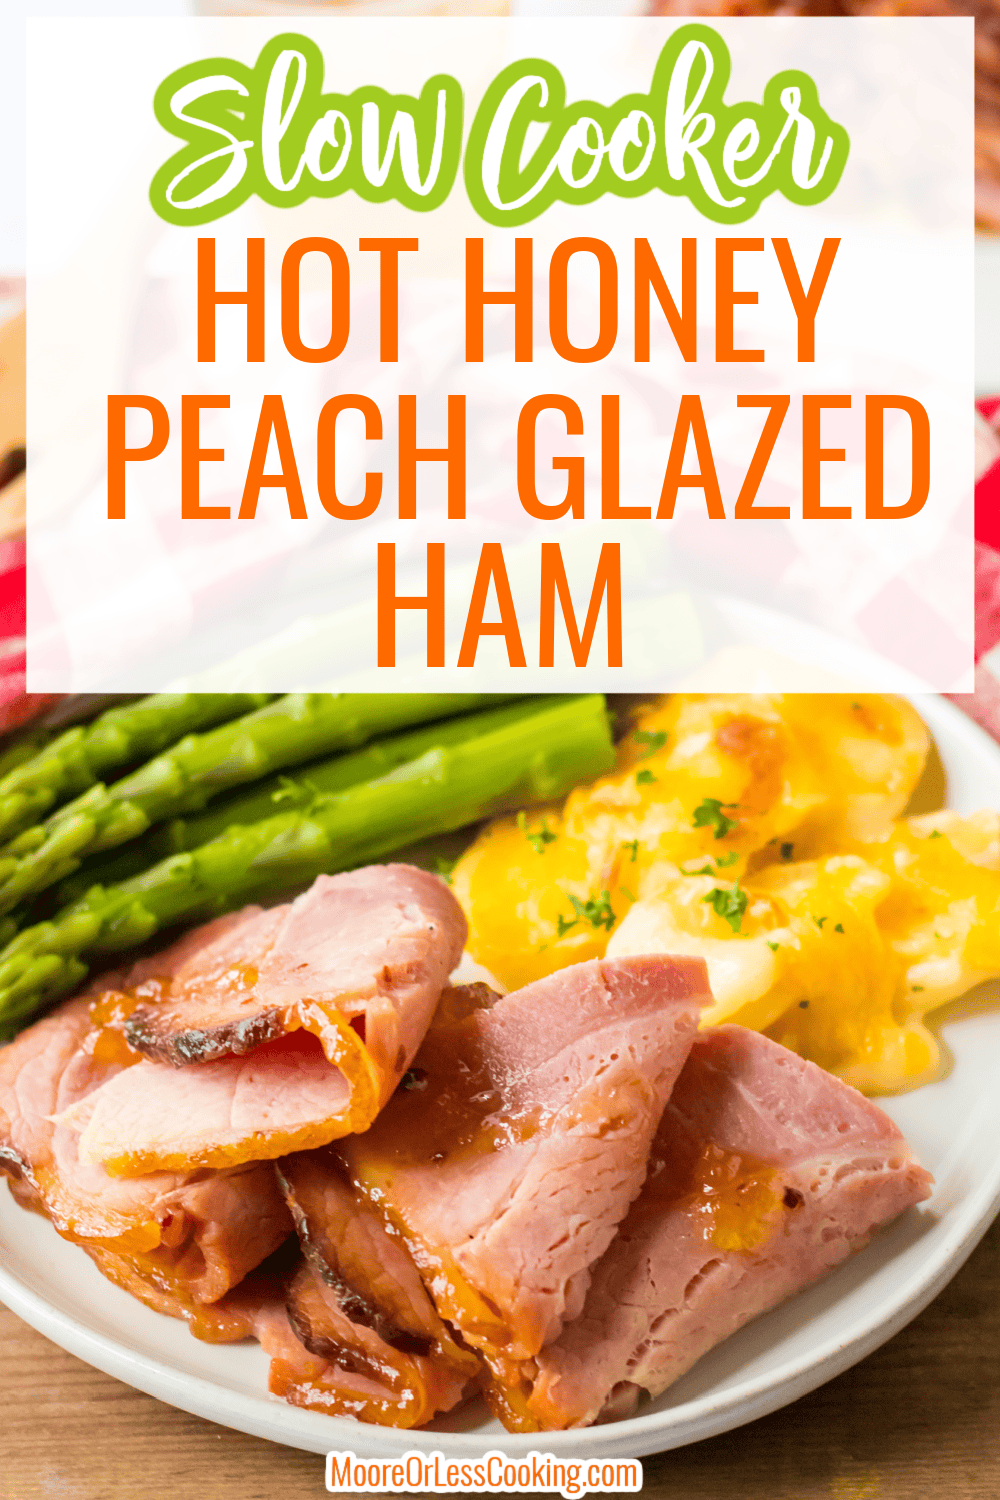 Slow Cooker Hot Honey Peach Glazed Ham is the perfect ham for Spring! Peach preserves, honey, brown sugar and chili flakes give this ham a sweet glaze with a little kick. Making it in the slow cooker frees up the oven. via @Mooreorlesscook